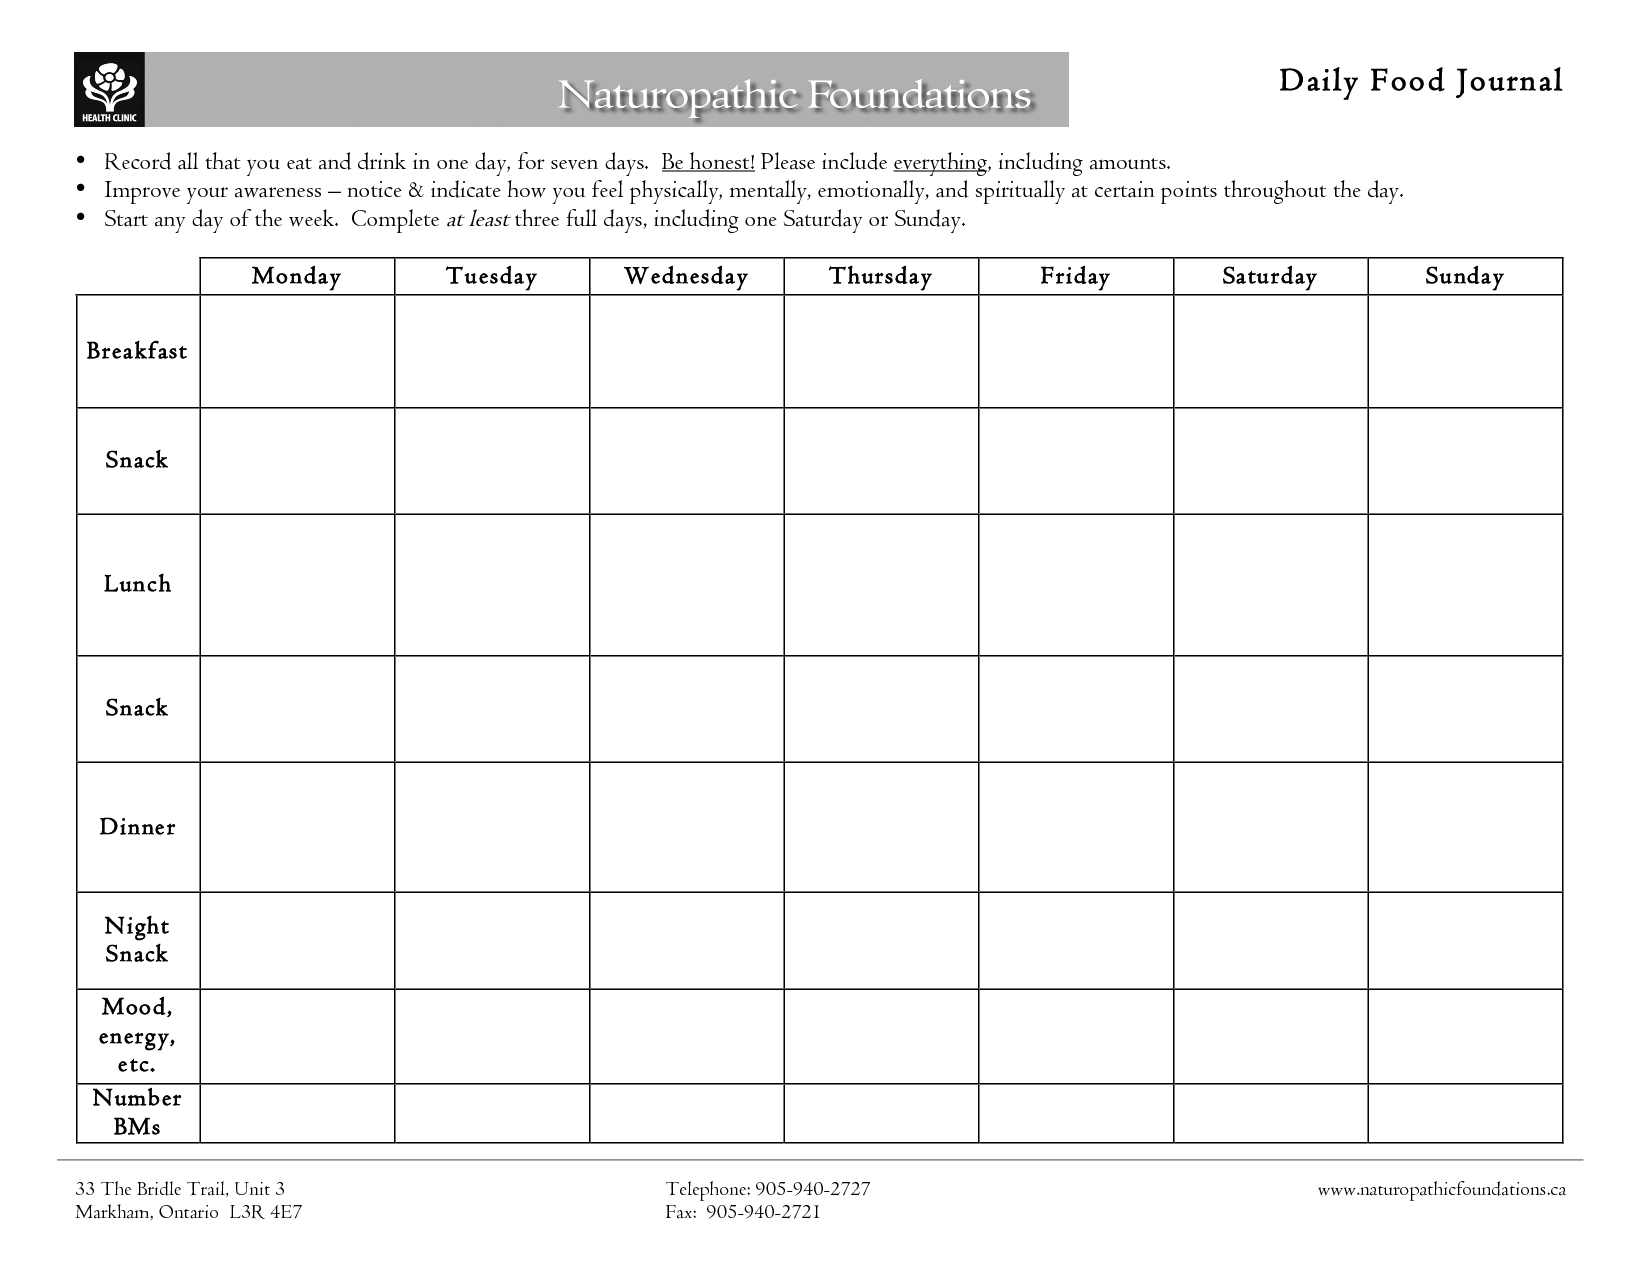 5-best-images-of-7-day-food-diary-printable-food-diary-log-sheets-free-printable-food-diary